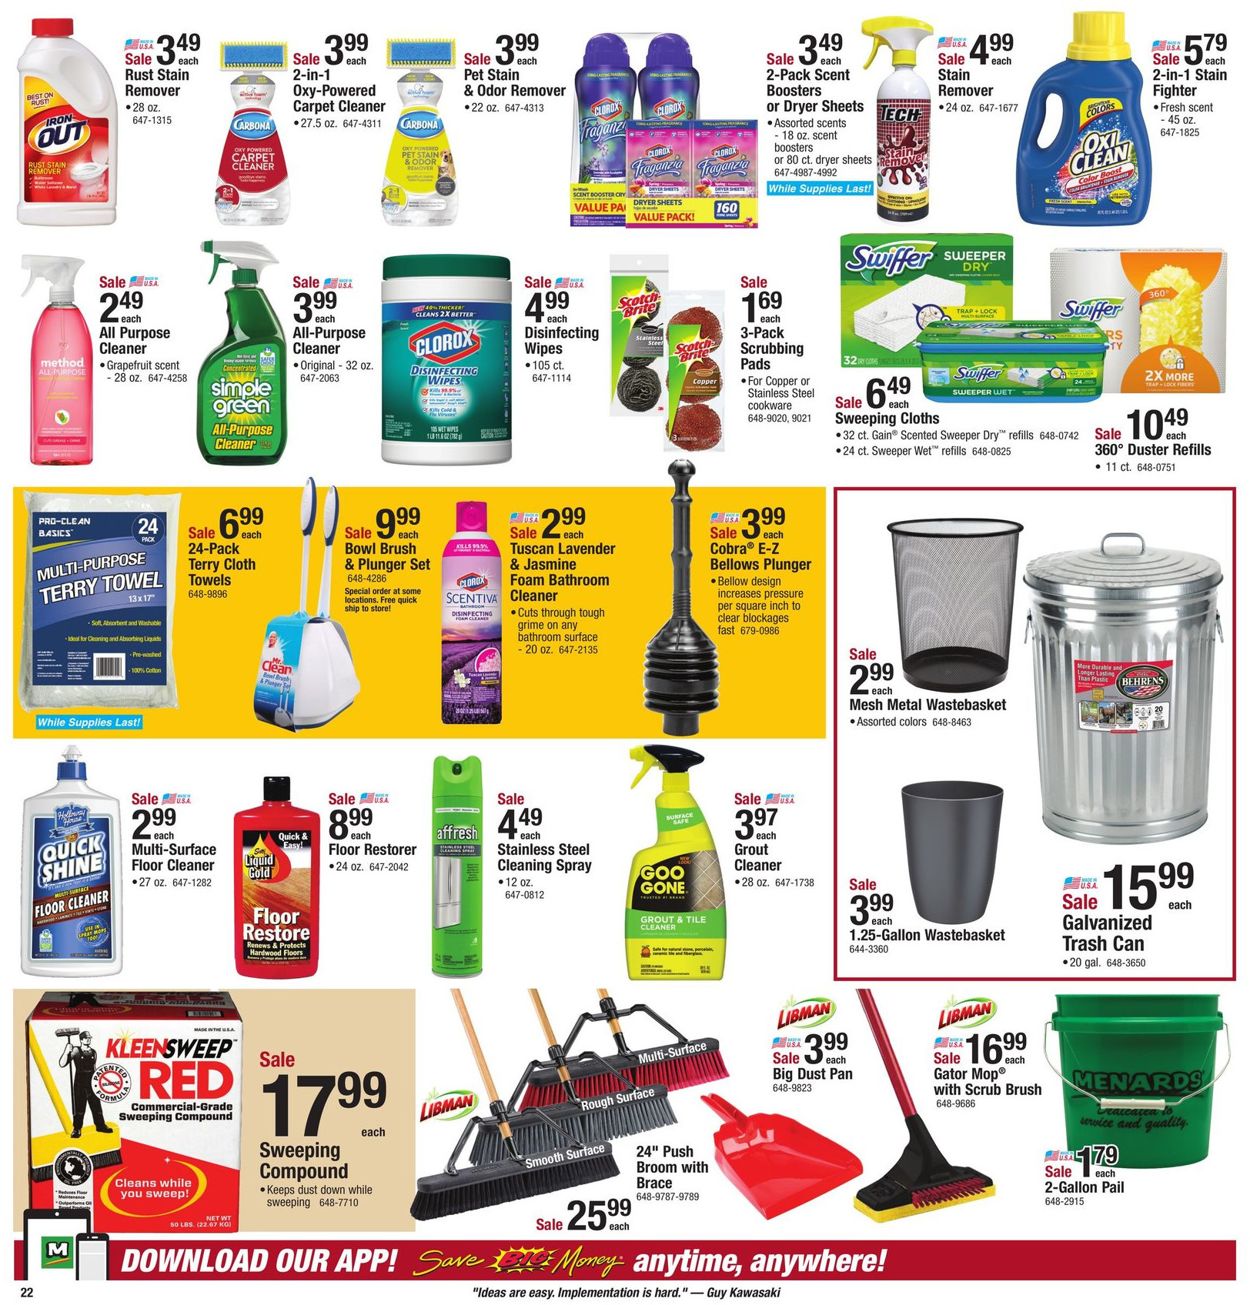 Menards Current weekly ad 09/15 - 09/21/2019 [28] - frequent-ads.com